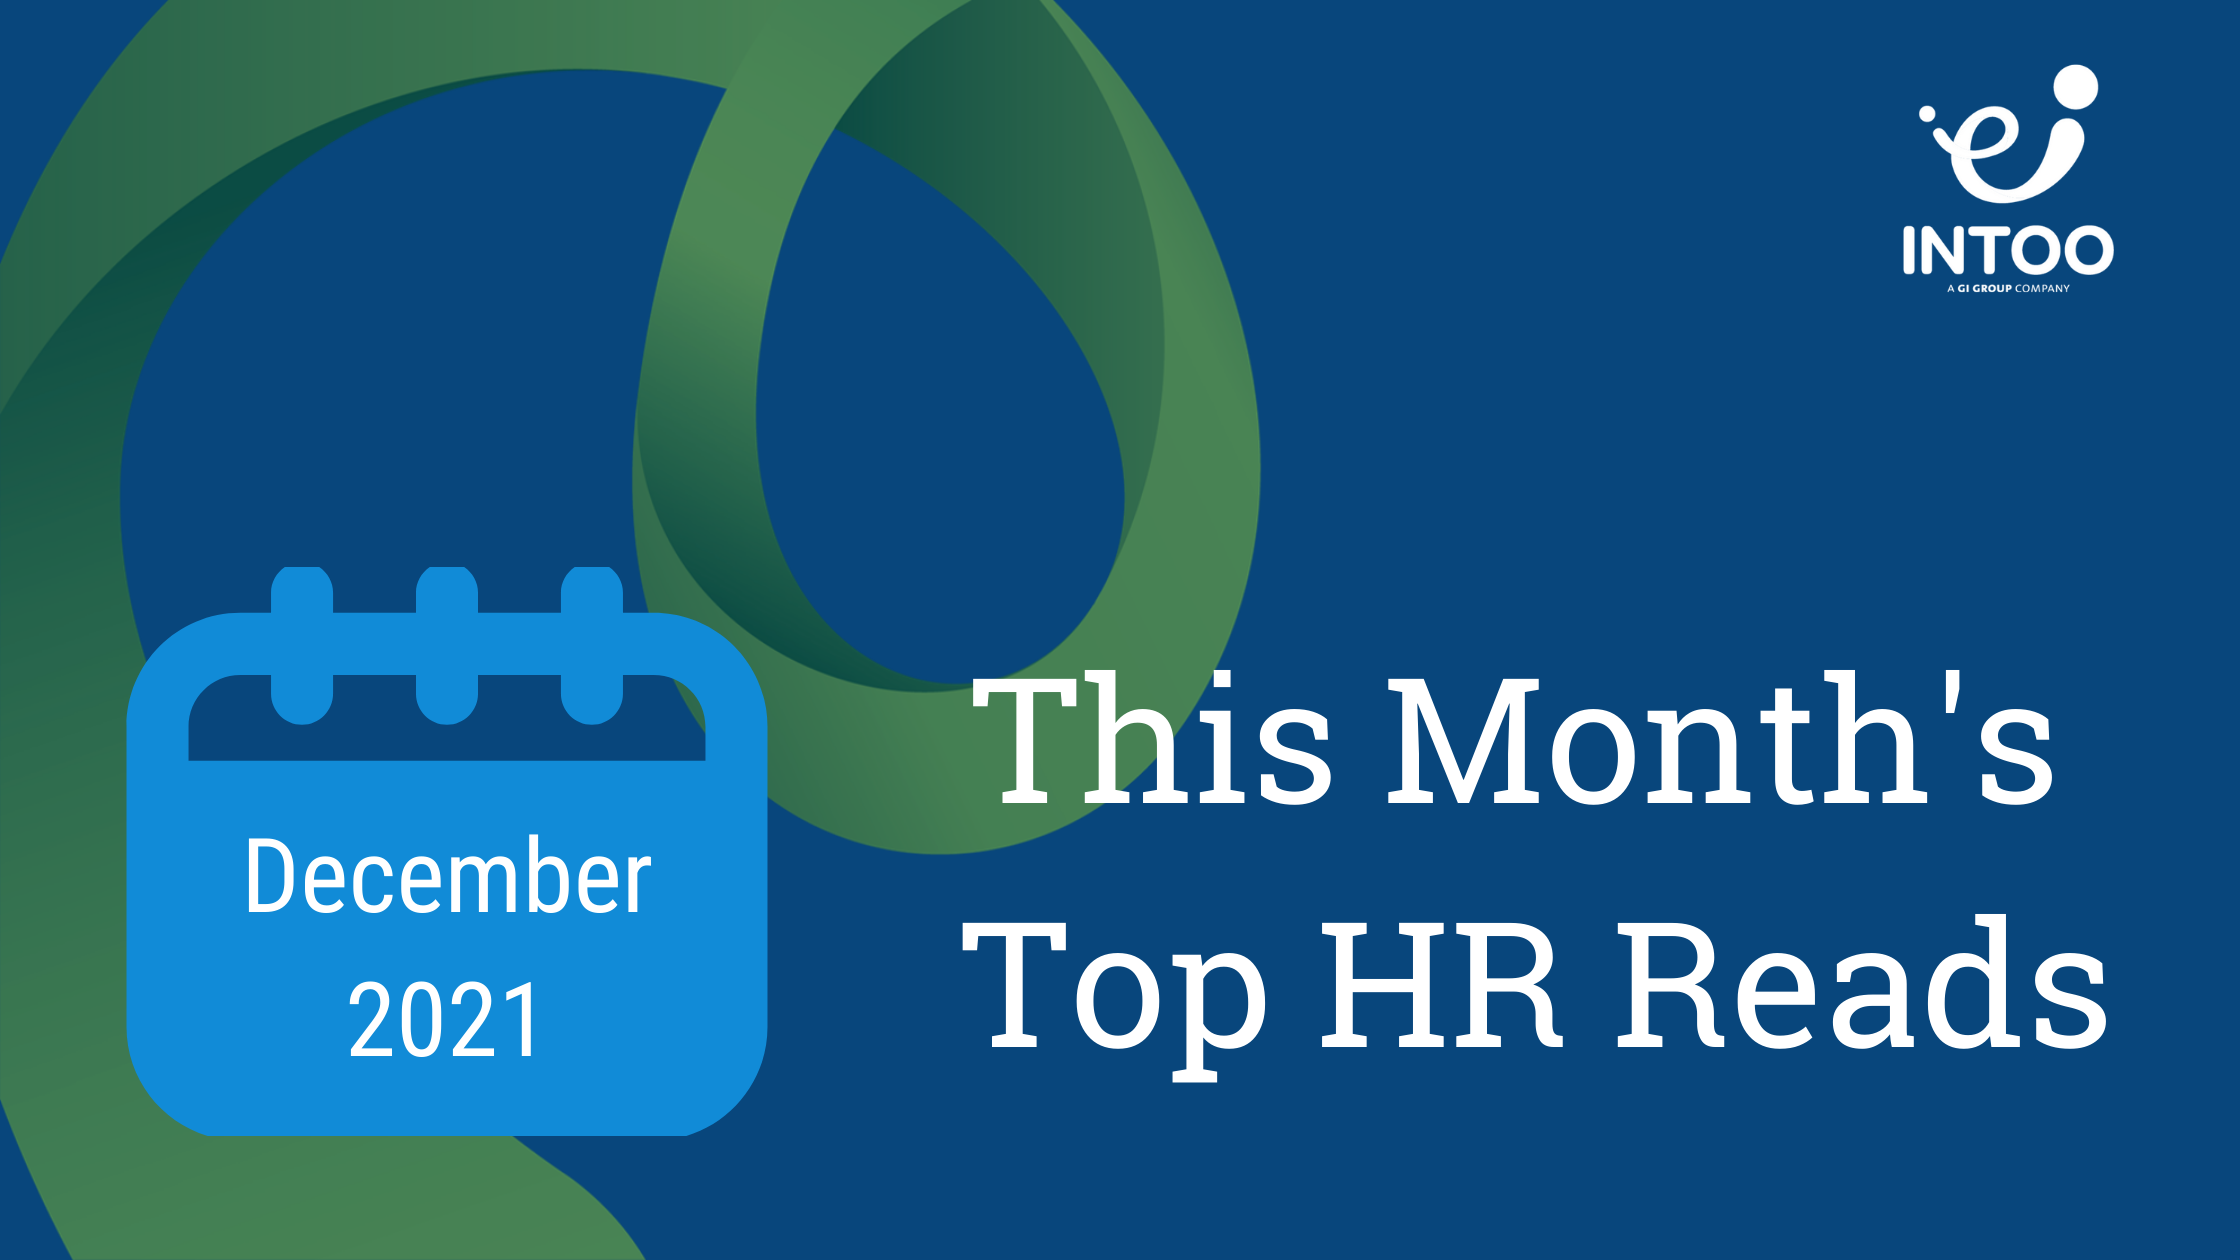 December 2021: This Month's Top HR Reads